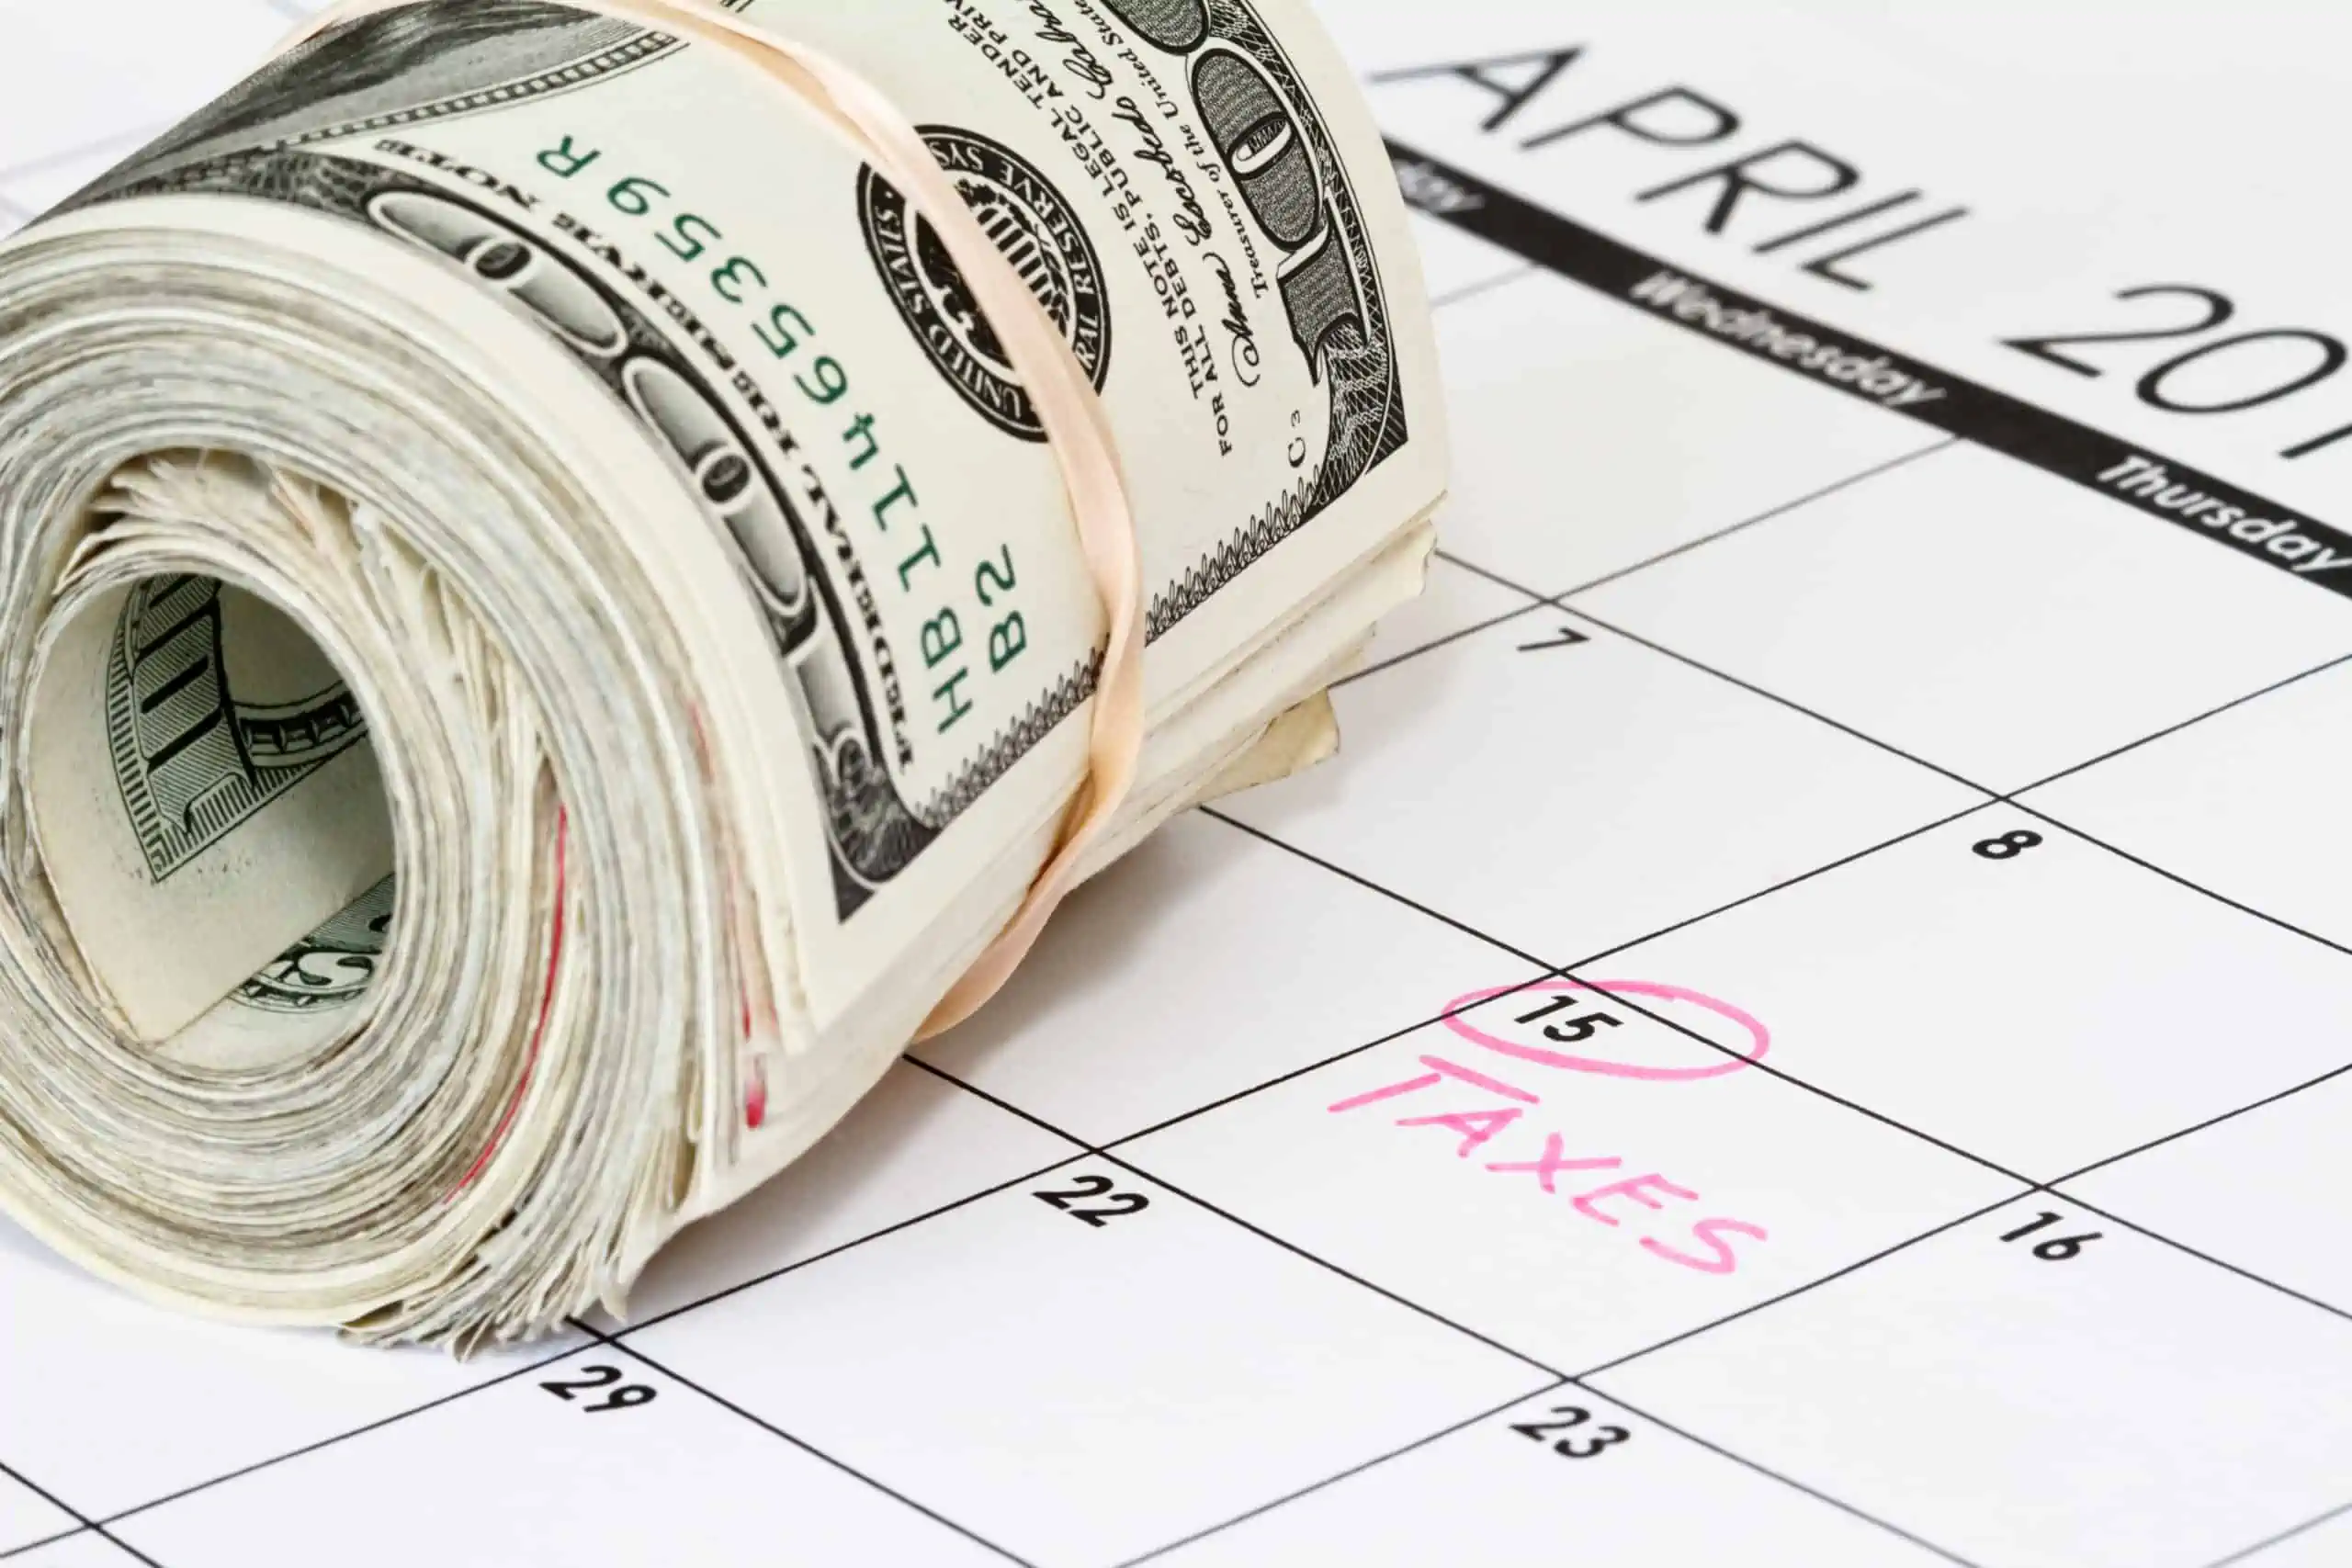 Tax filing deadline, April 15, circled on a calendar in pink with "taxes" written on it with a roll of $100 bills on top